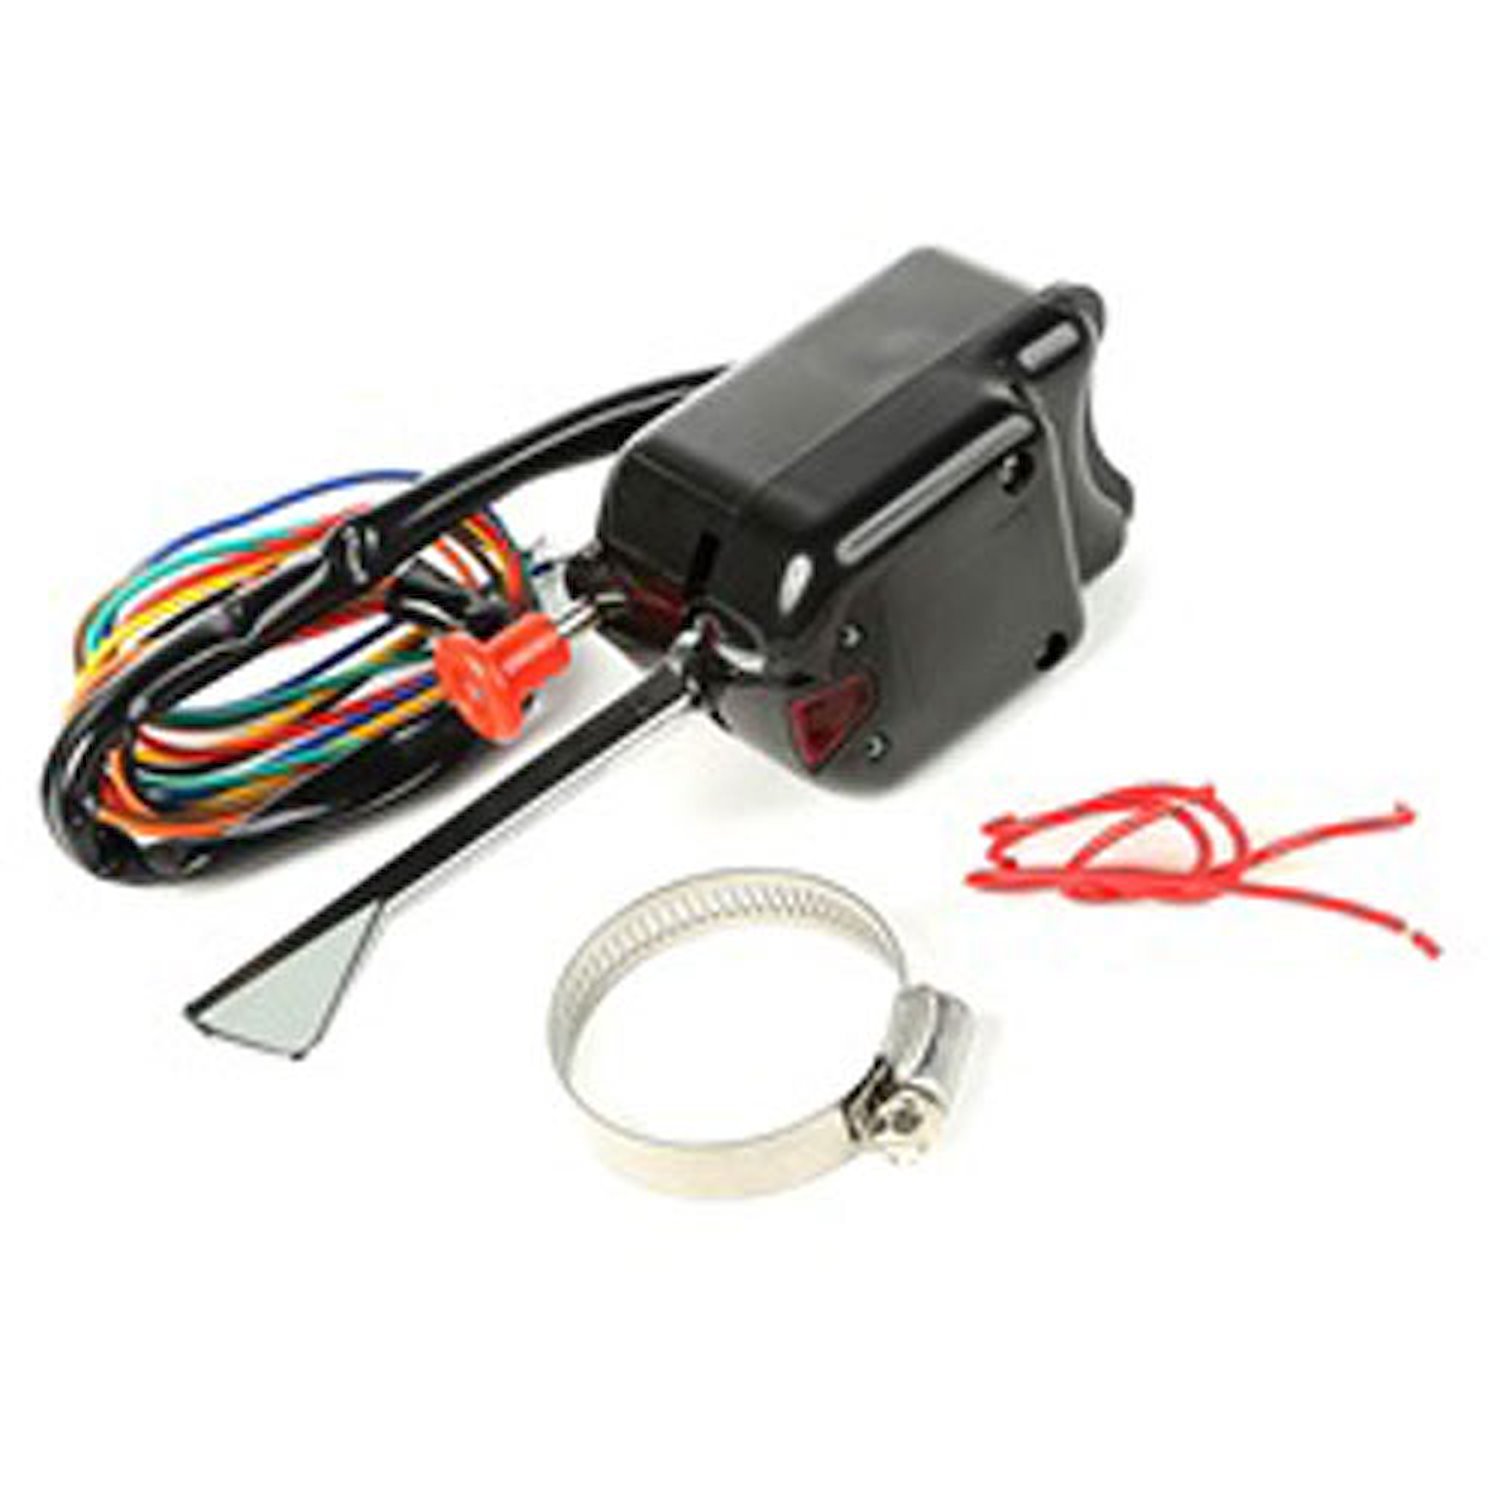 Black replacement turn signal switch kit from Omix-ADA